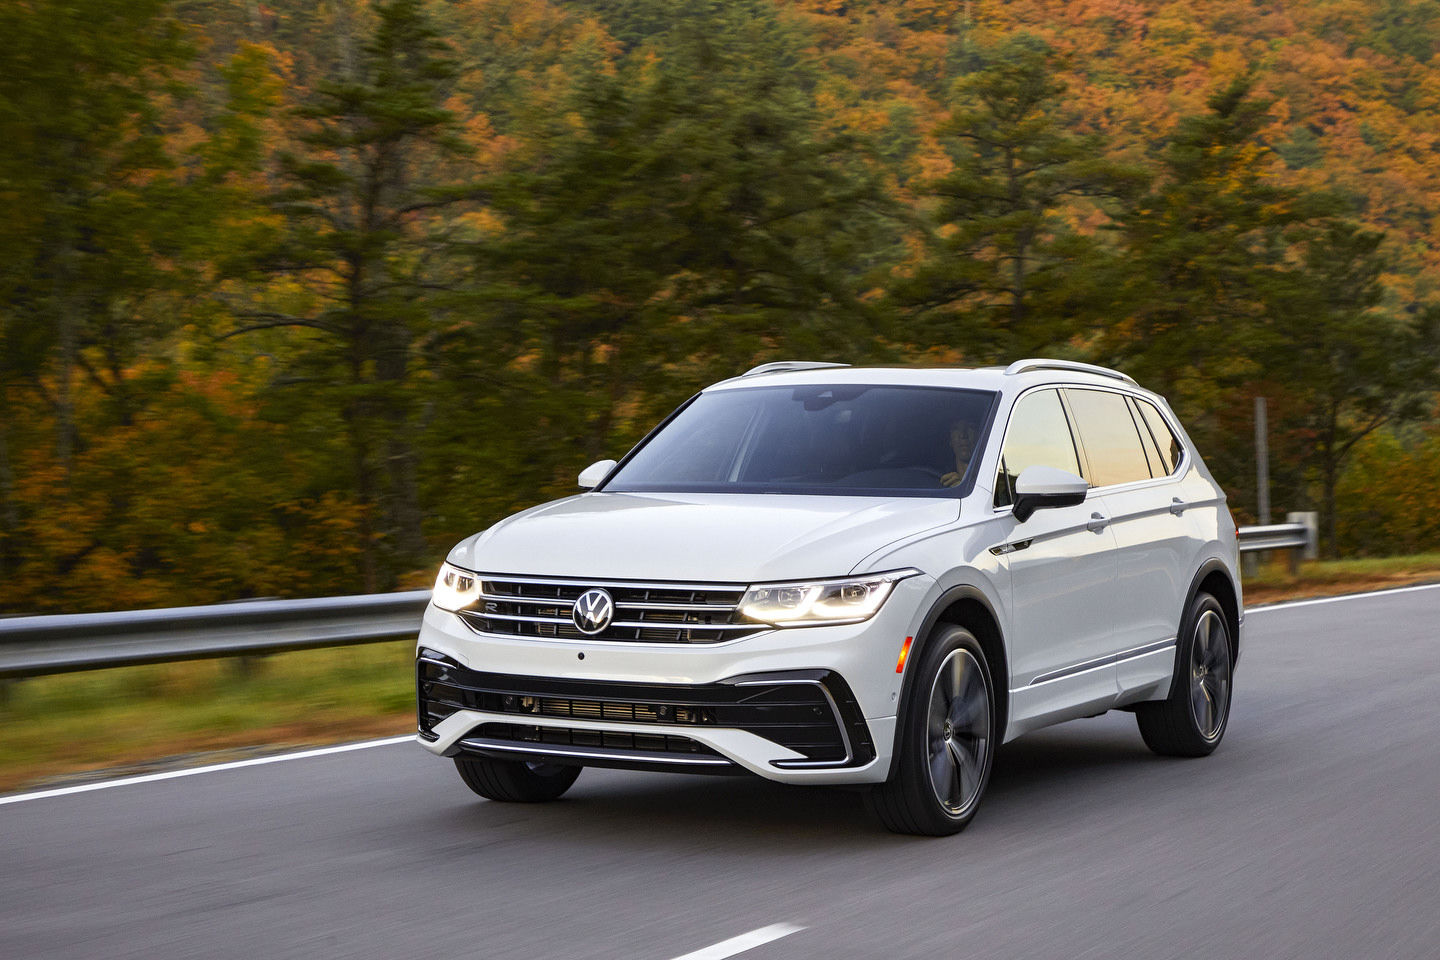 VW's new Tiguan shows the steep climb ahead for EVs like the ID.4